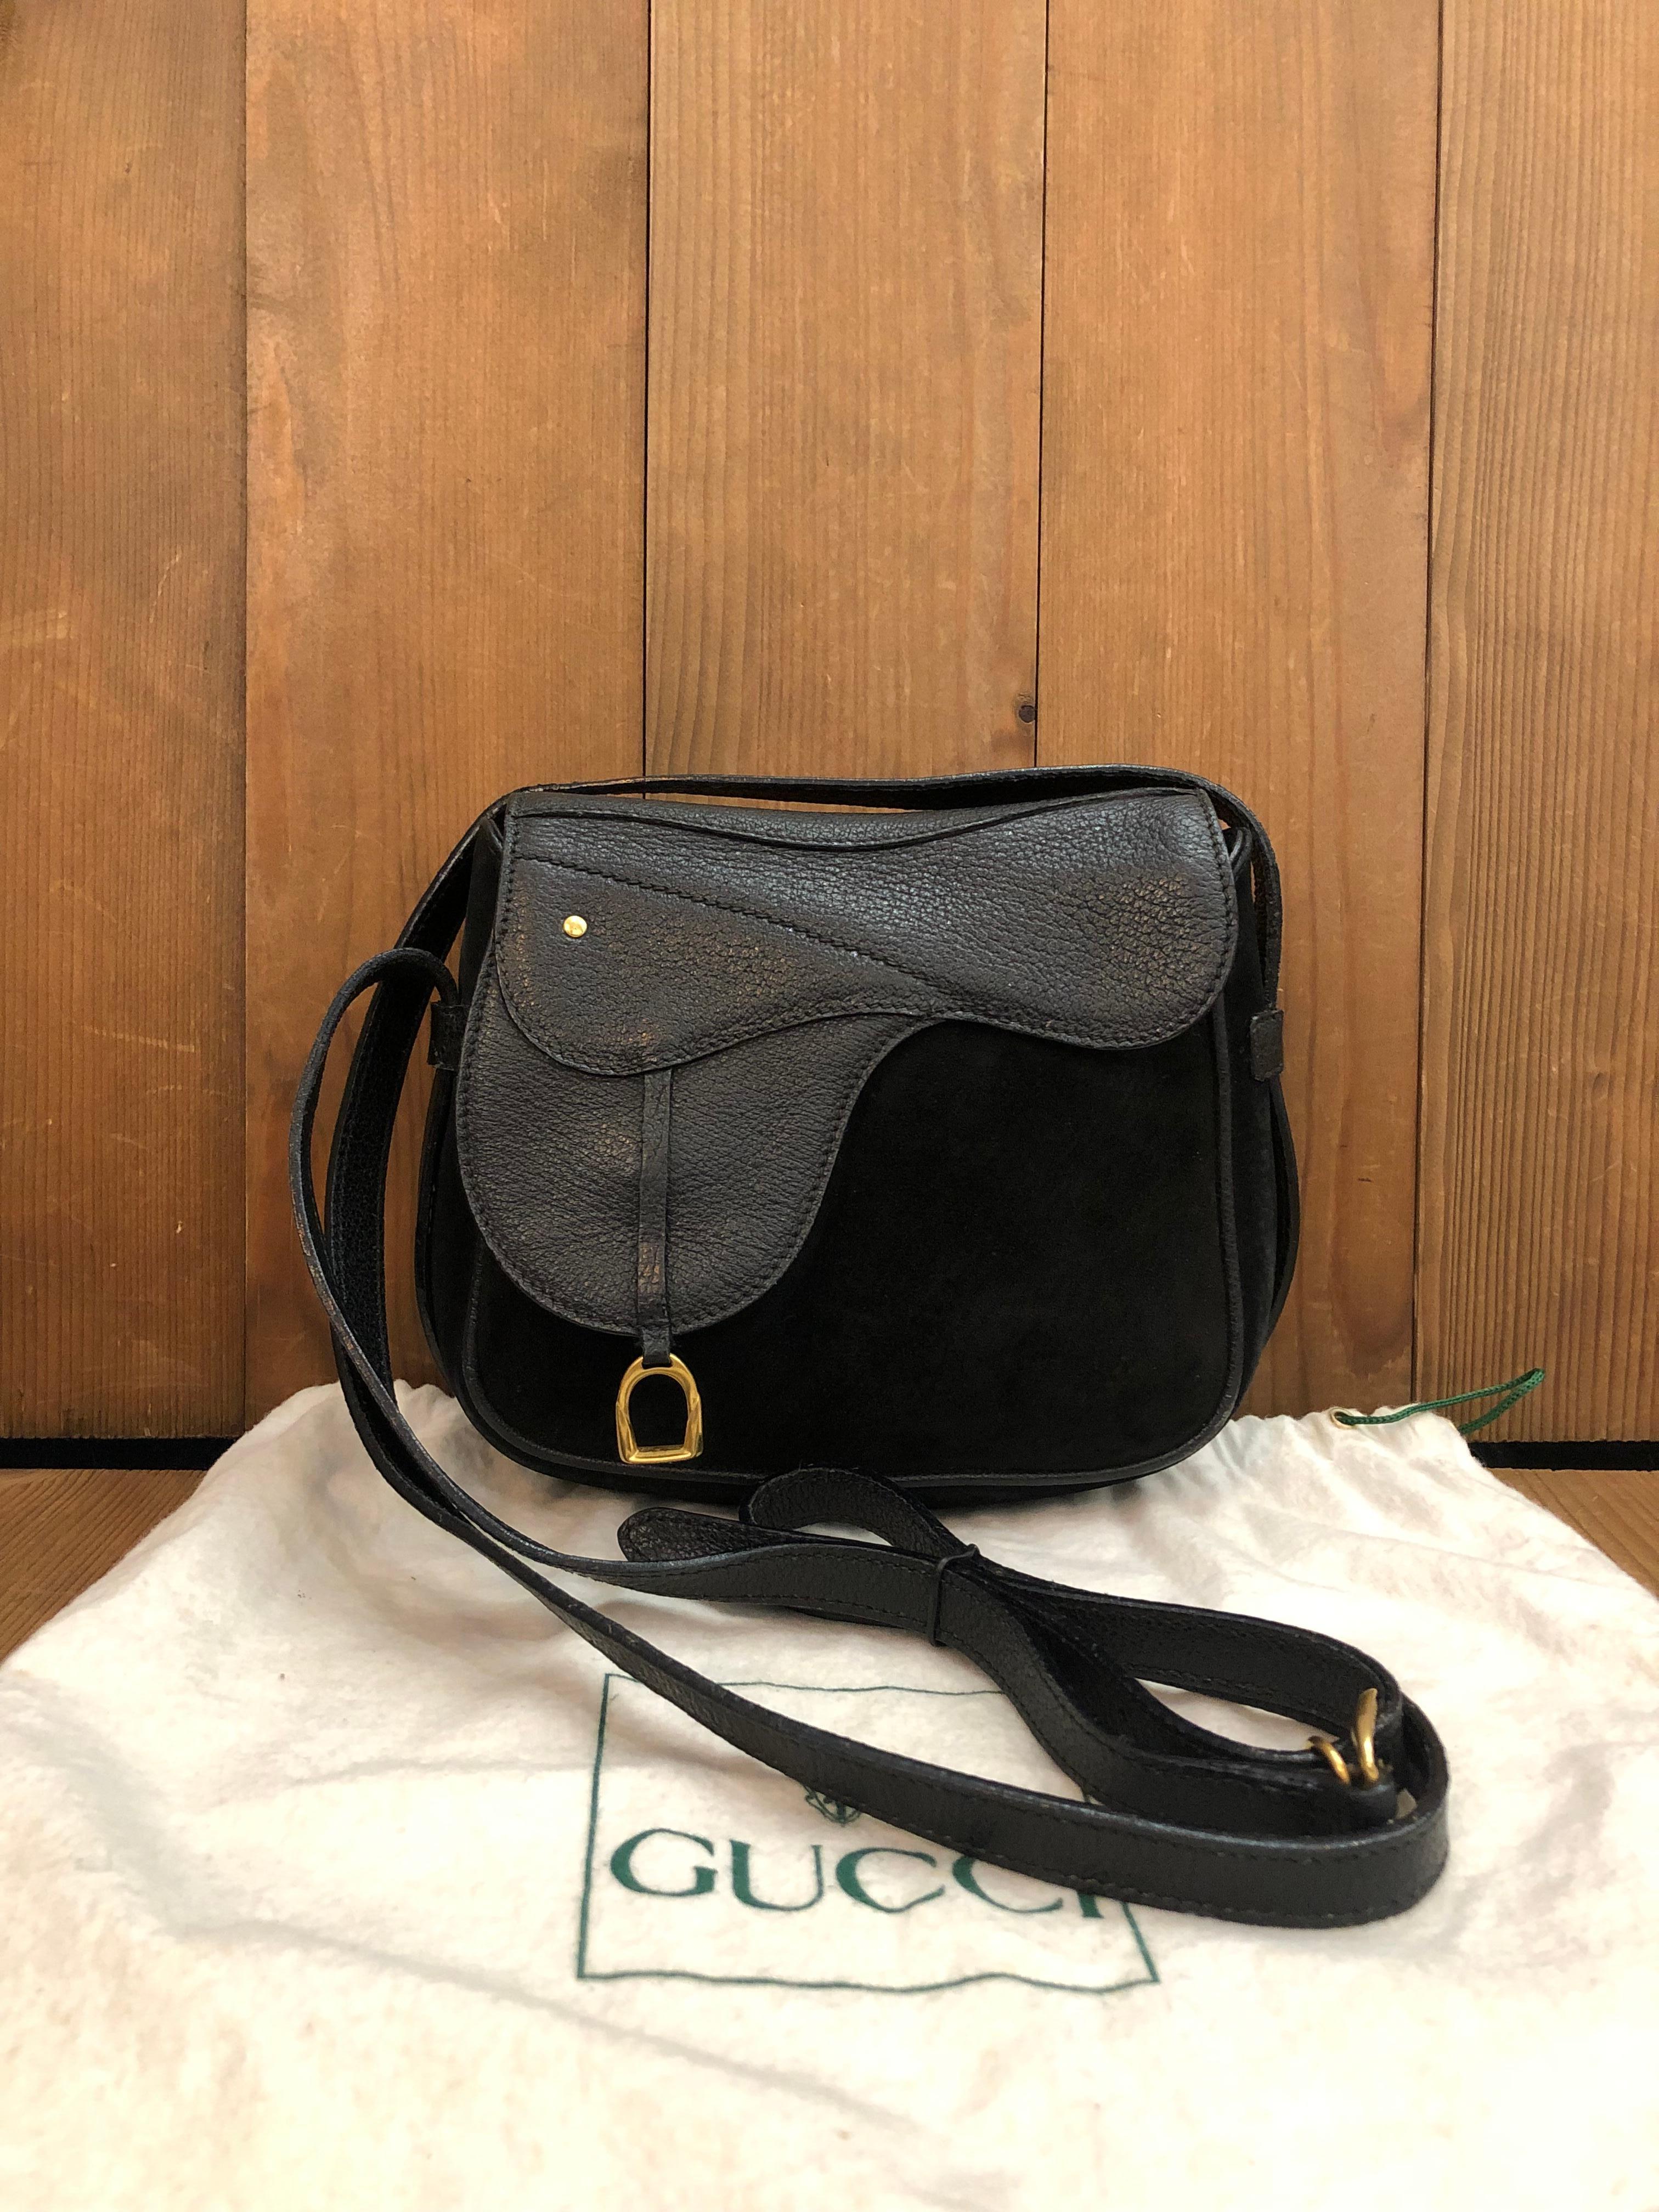 This vintage GUCCI mini saddle crossbody bag is crafted of pigskin and nubuck leather in black featuring gold toned hardware. This bag also features two leather loops at the back for securing it on your belt. Front magnetic snap closure opens to a